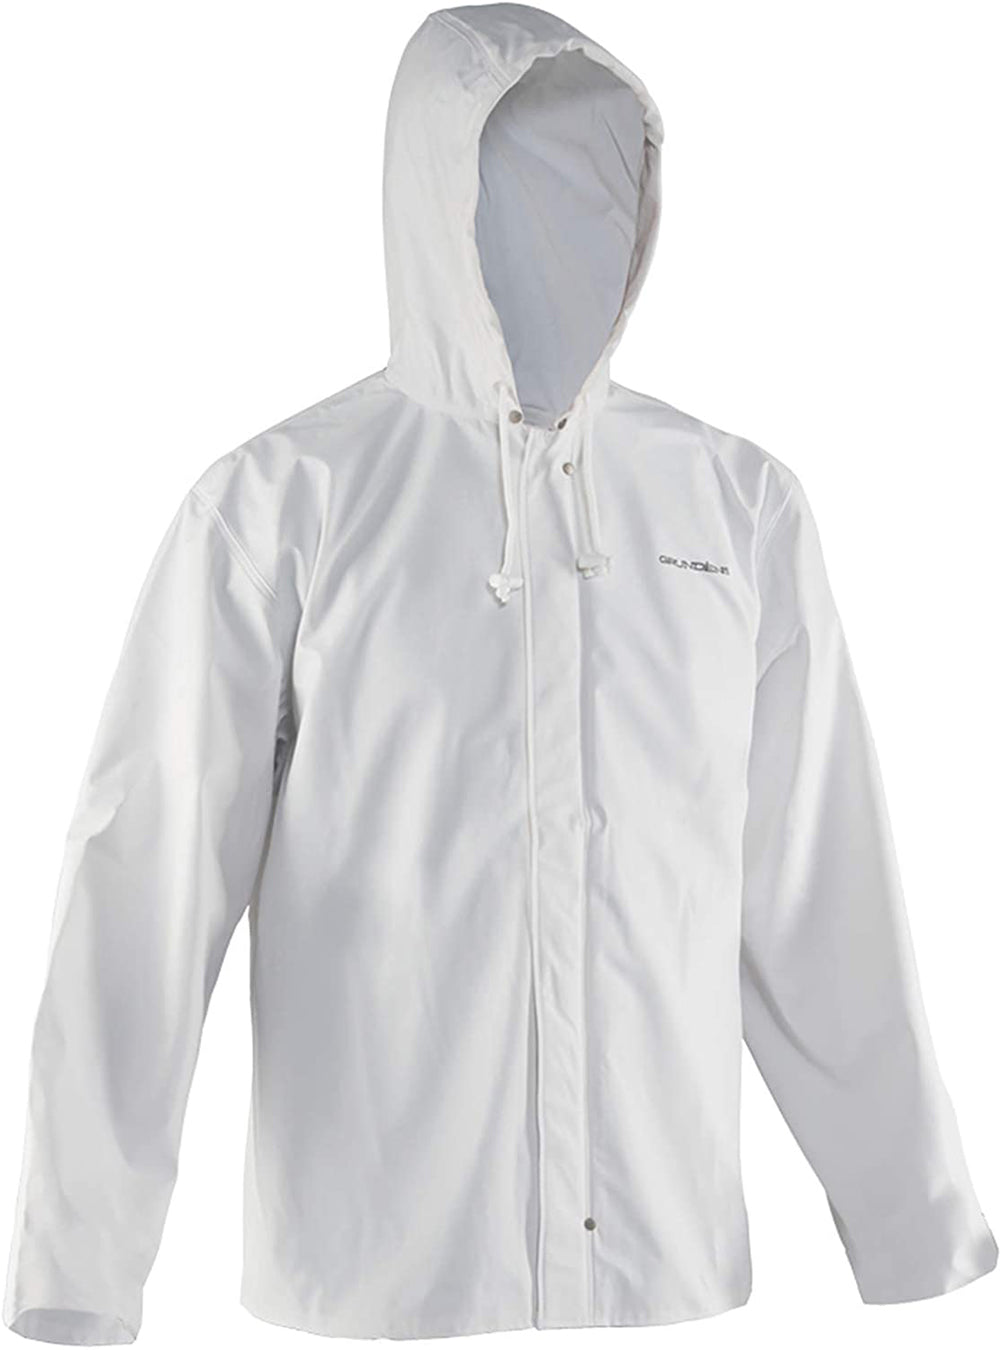 Petrus 82 Jacket in White color